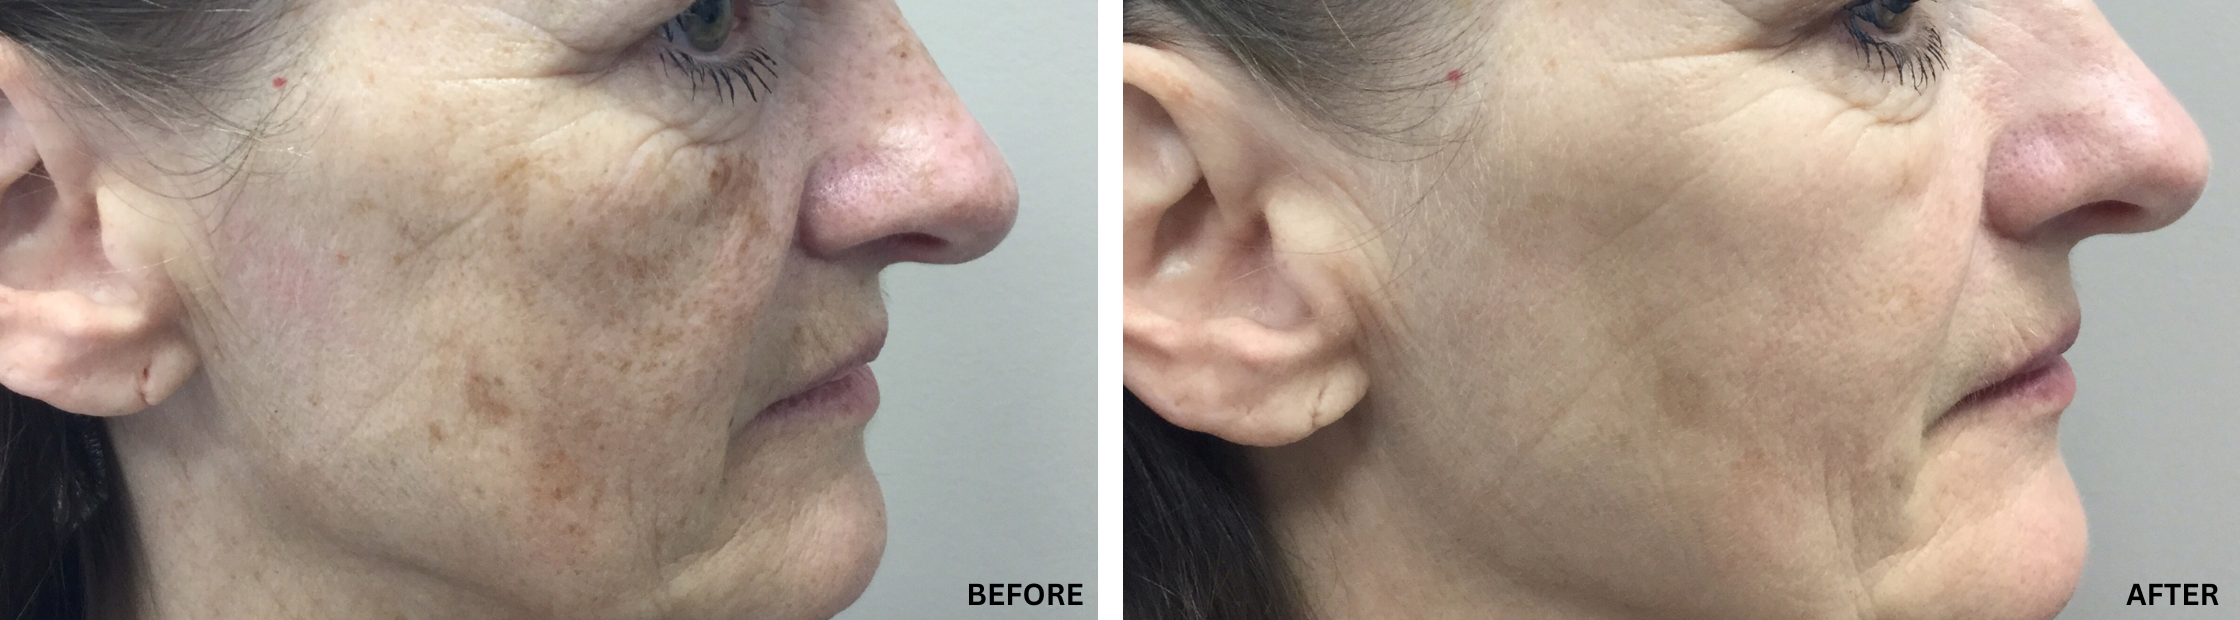 ipl laser before and after